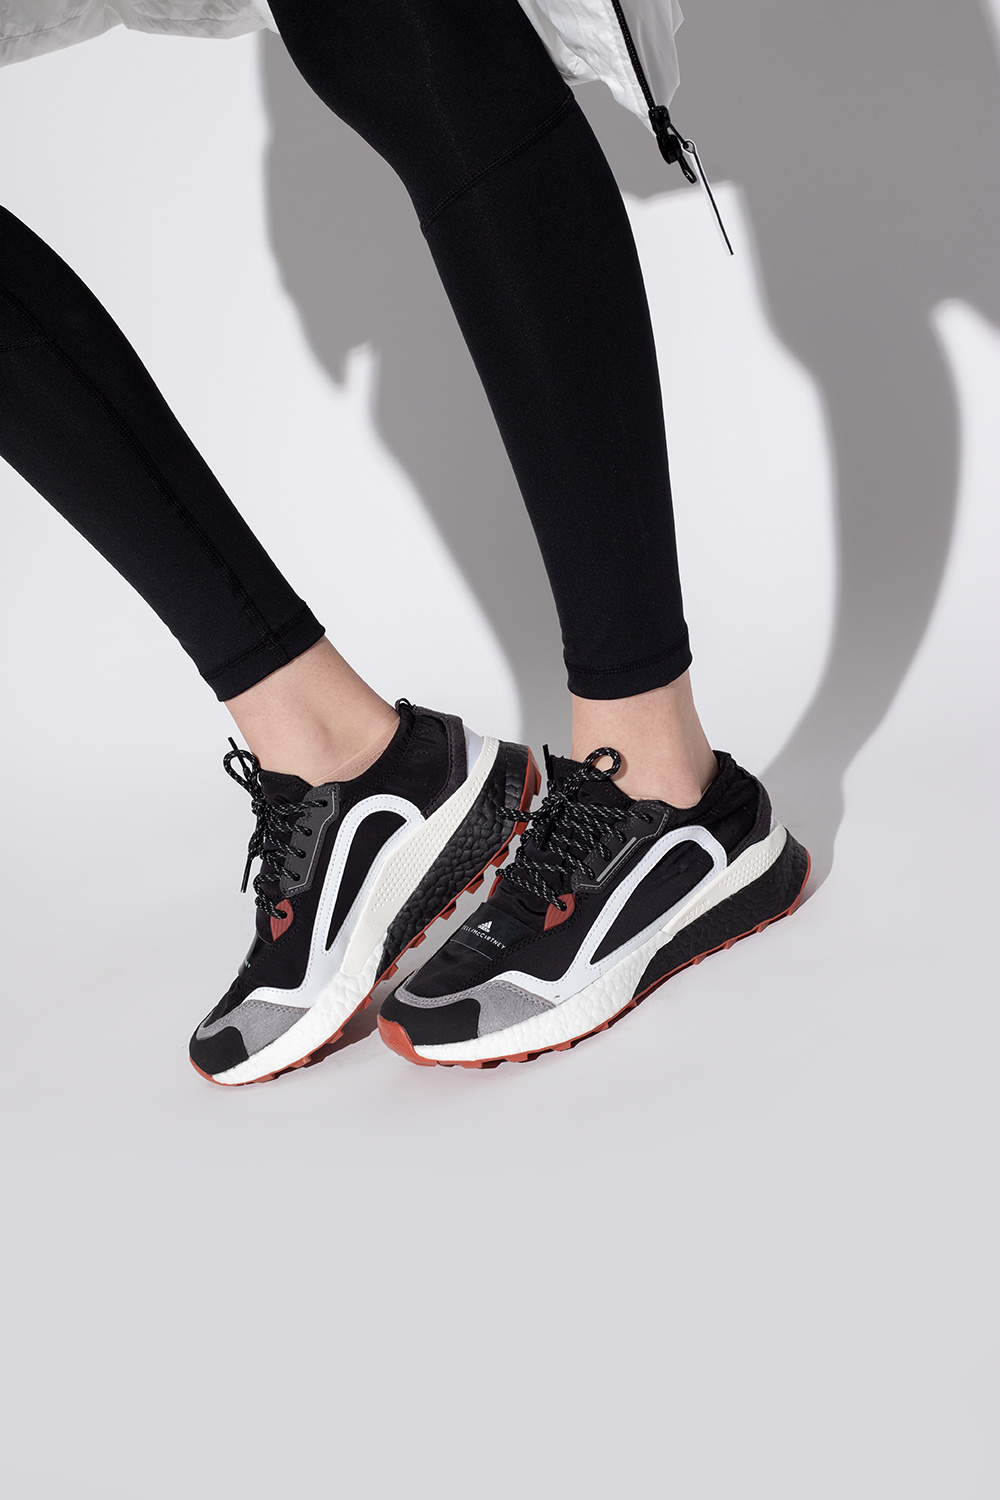 adidas leather by Stella McCartney ‘OutdoorBoost 2.0 Cold’ sneakers